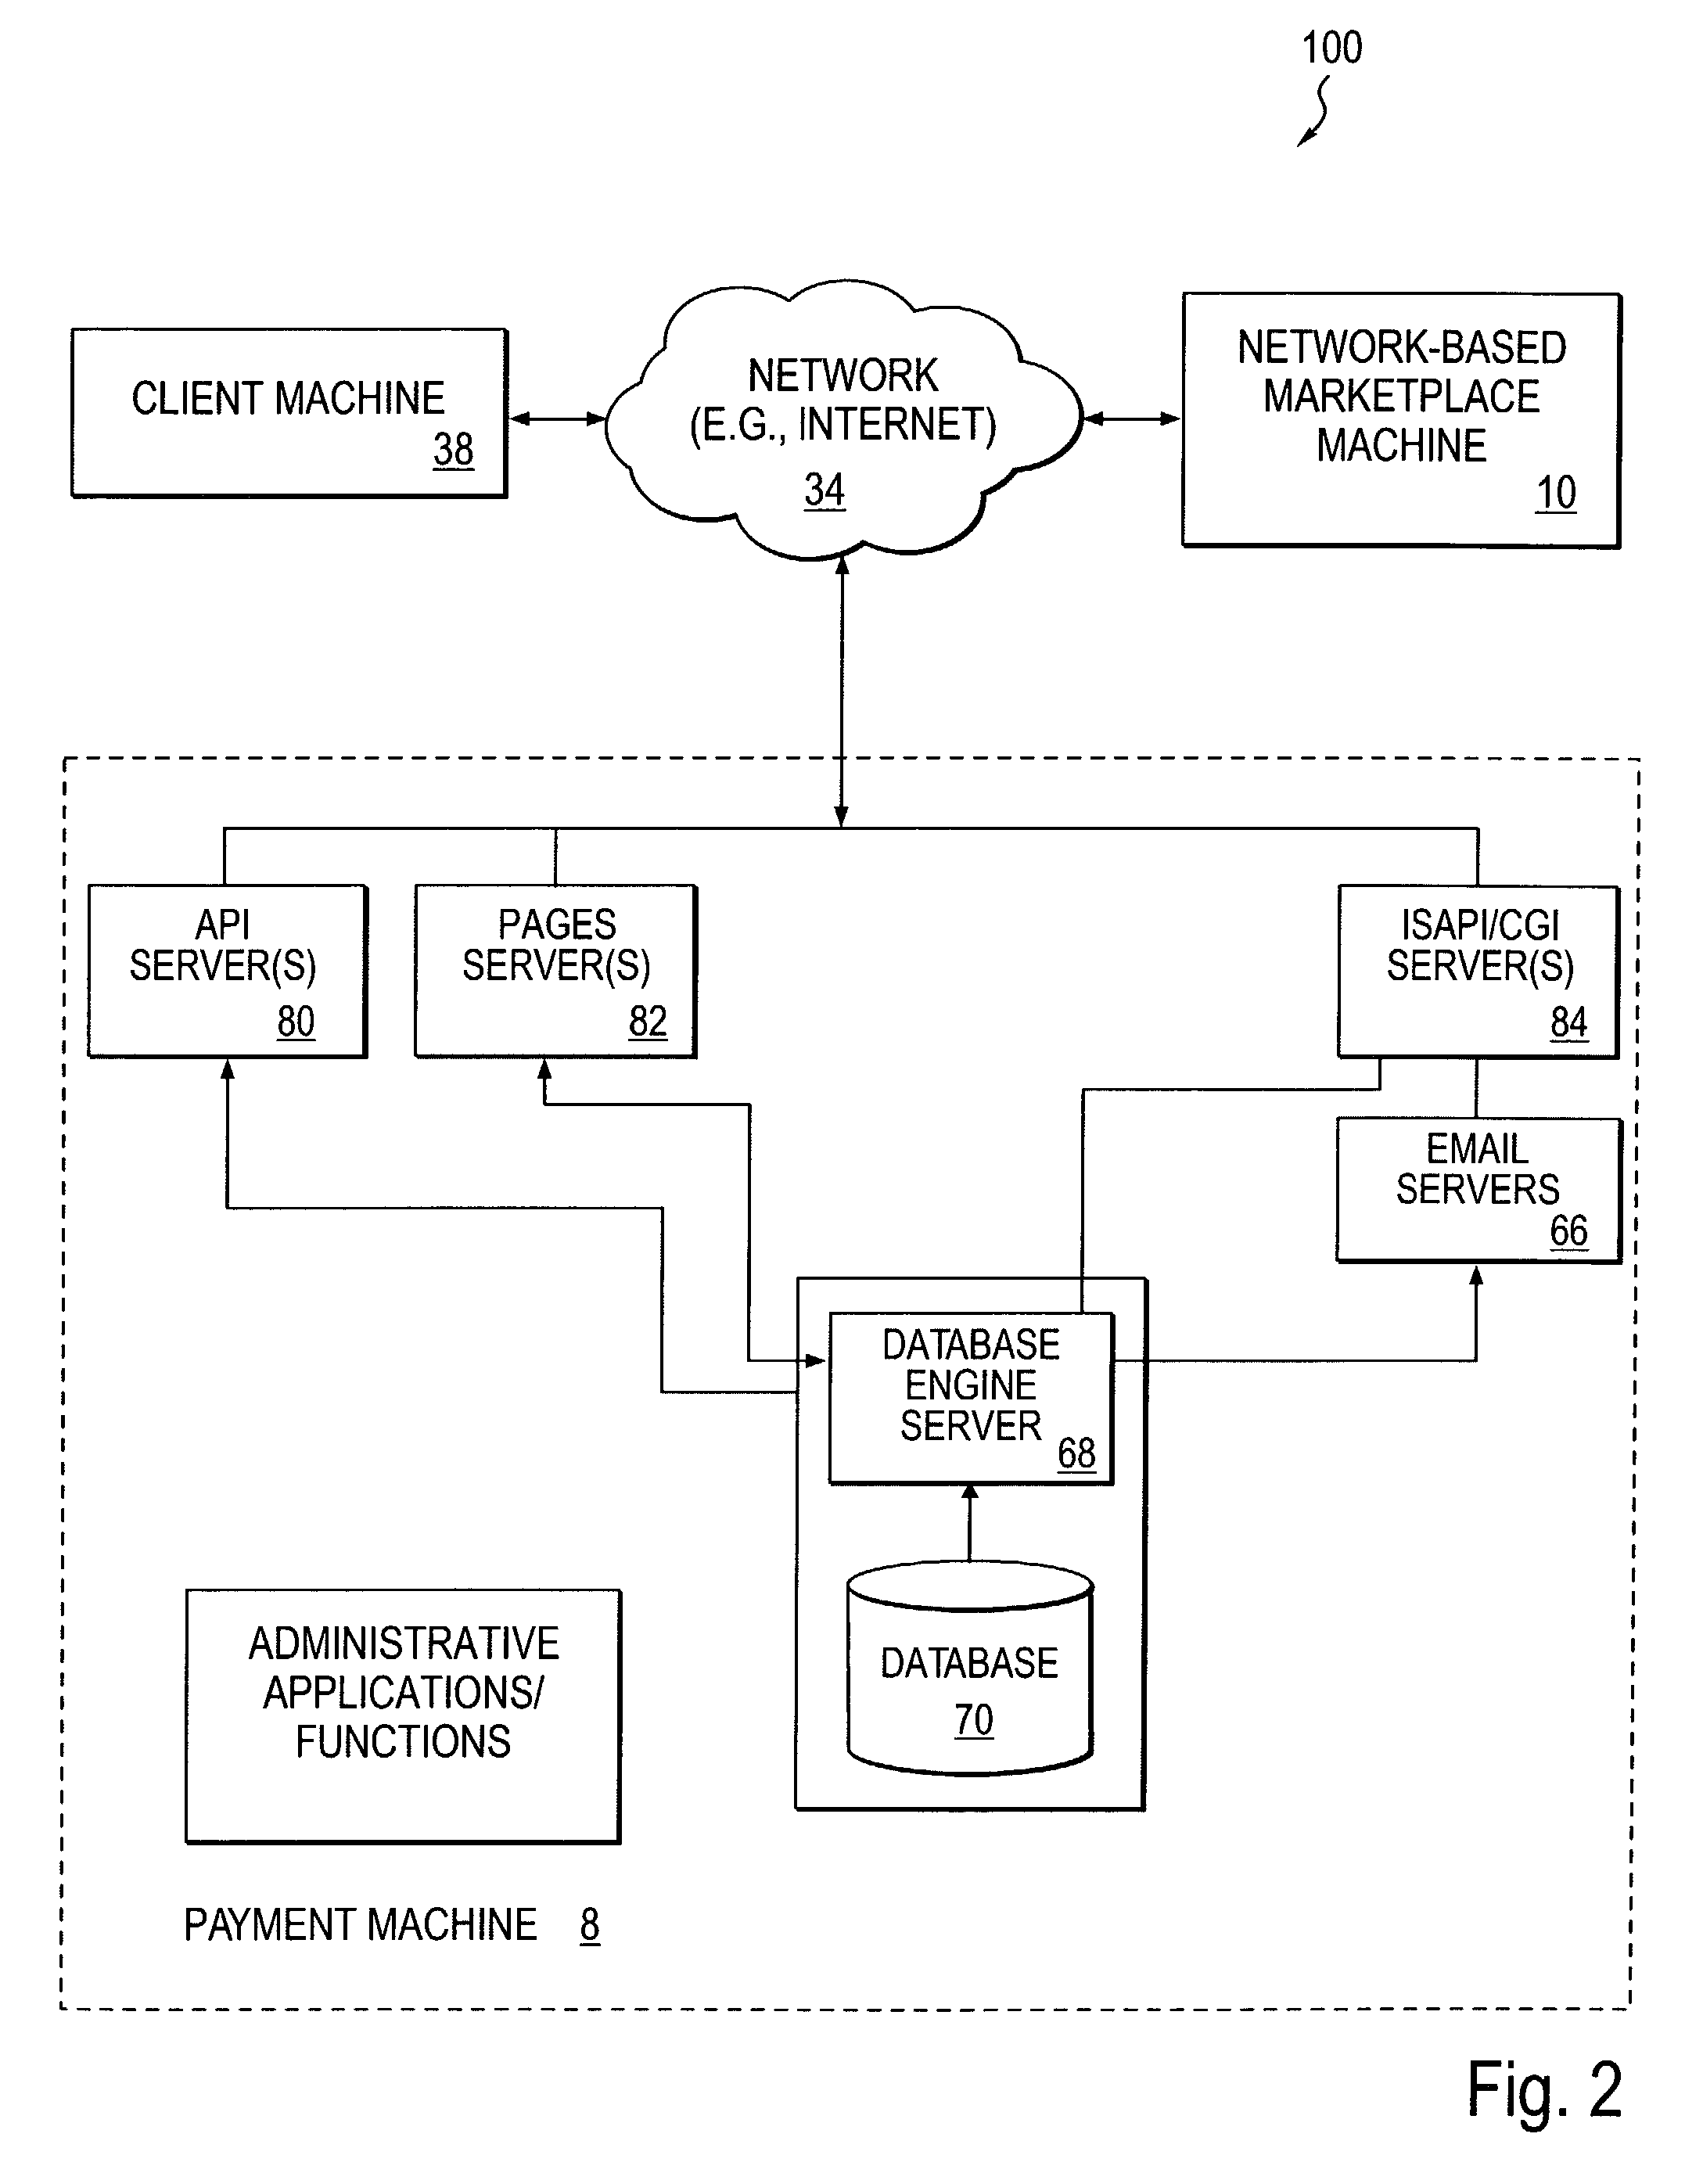 Method and system to automate payment for a commerce transaction